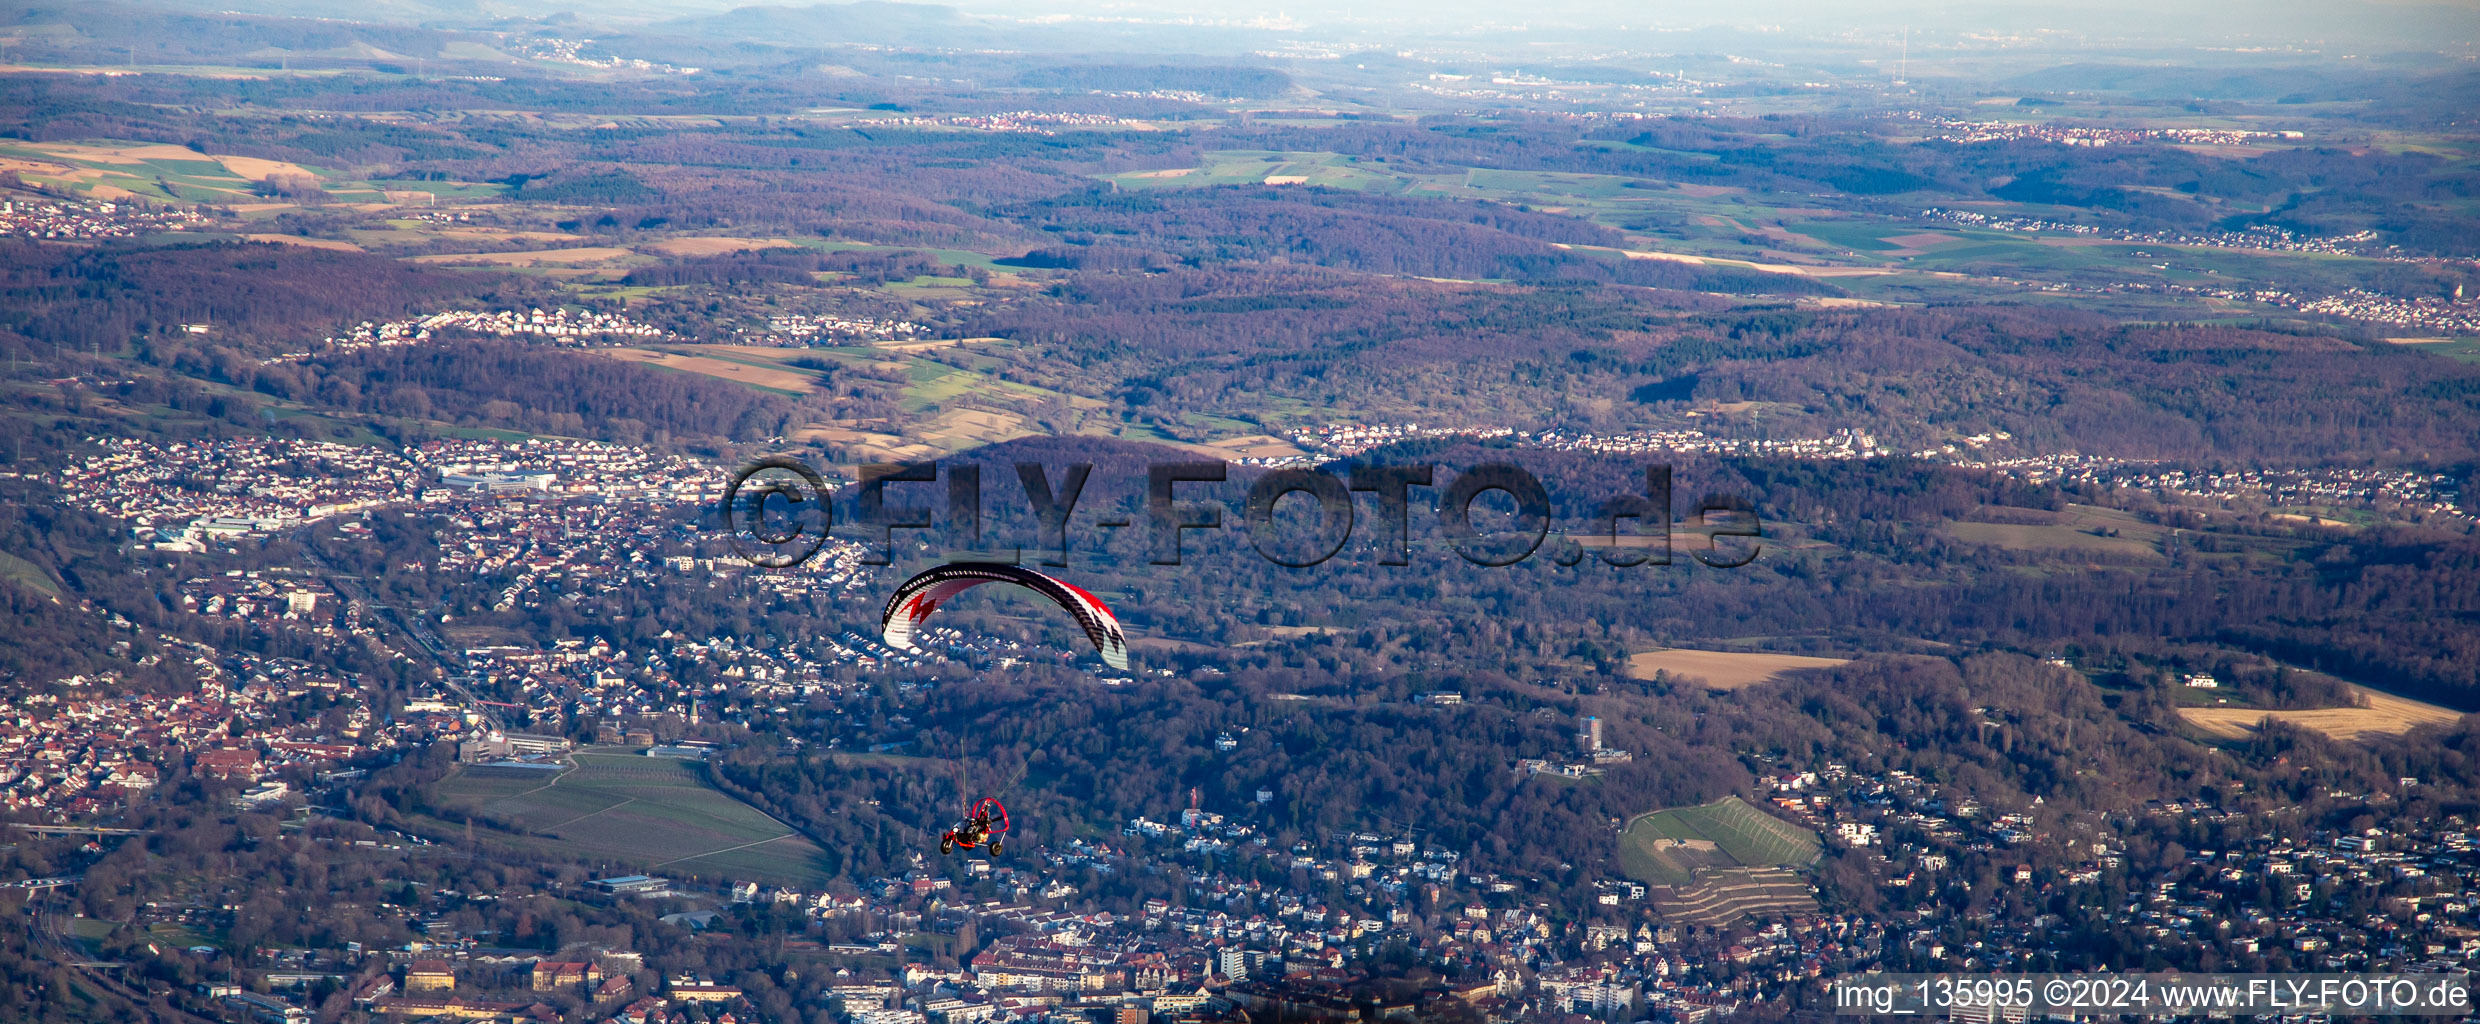 Over the Turmberg in the district Durlach in Karlsruhe in the state Baden-Wuerttemberg, Germany